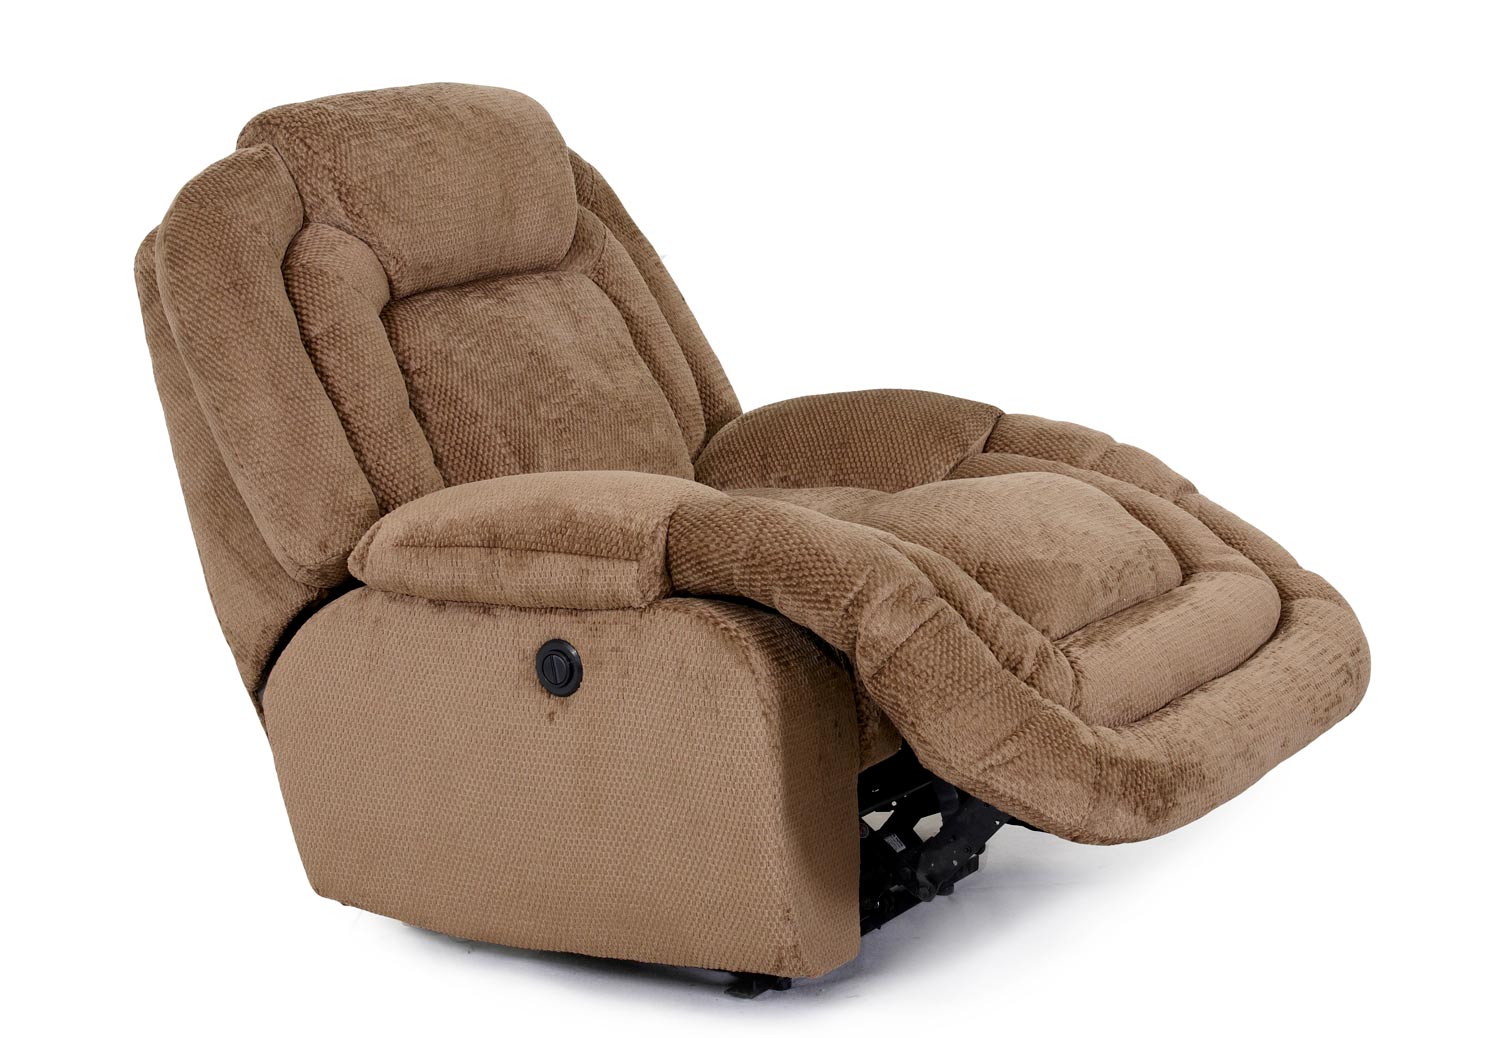 Barcalounger Apex II Casual Comforts Power Recliner Chair - Dallas Mink